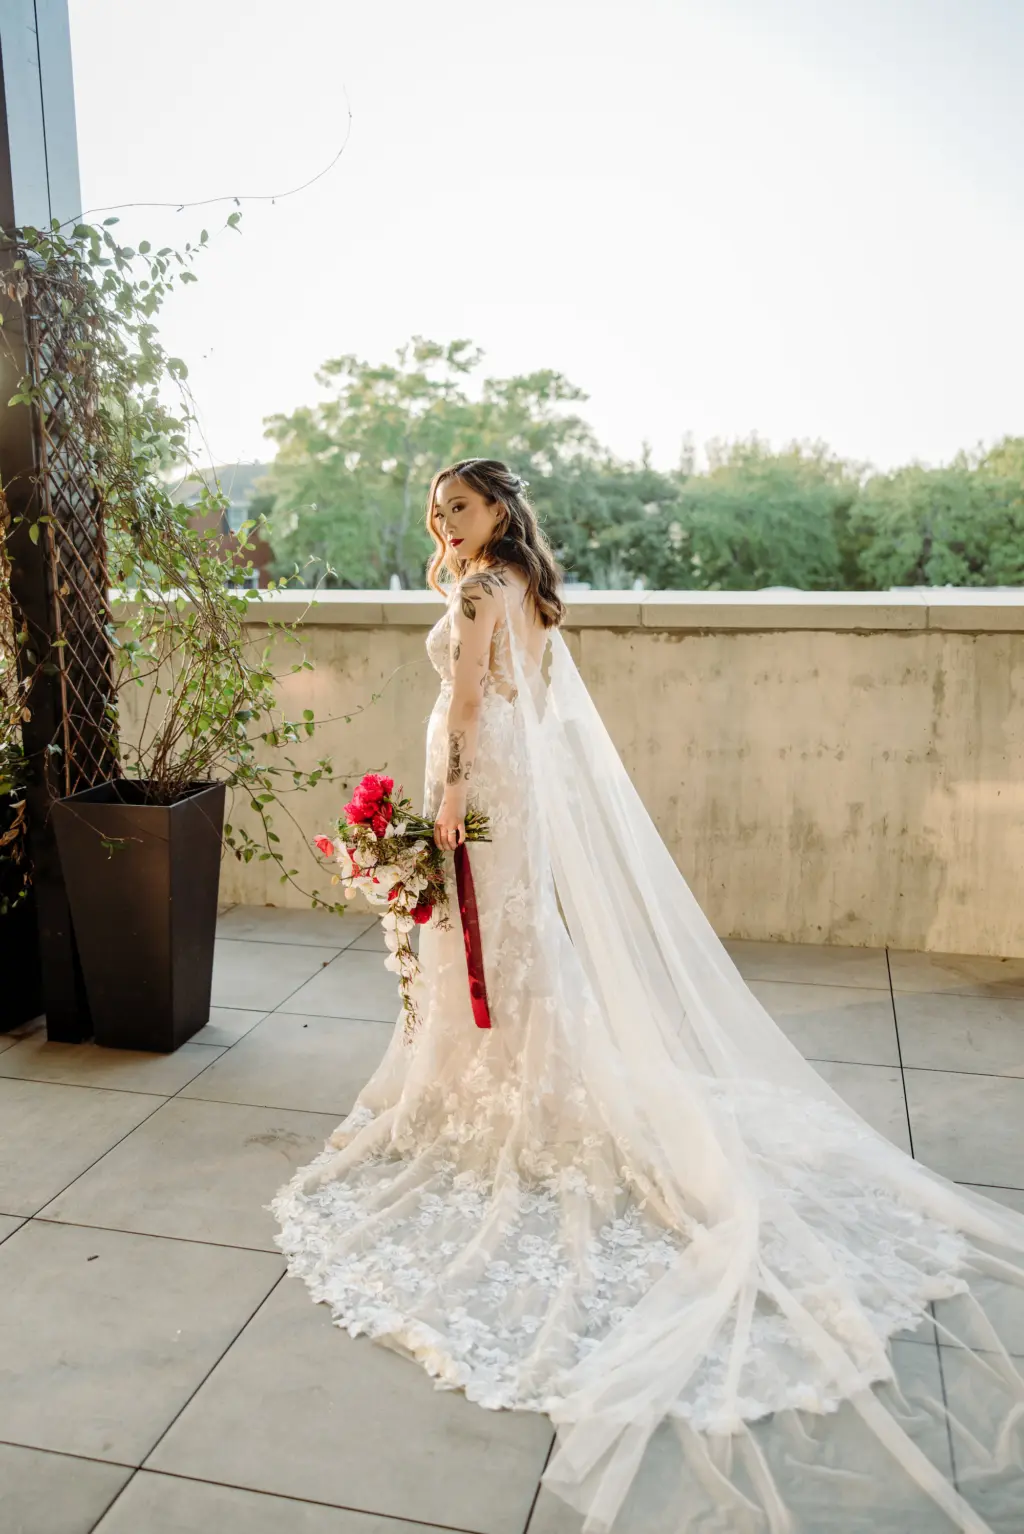 Nude and White Lace Floral Applique Madi Lane-Dahla Wedding Dress Inspiration | Waterfall Veil Cape Ideas